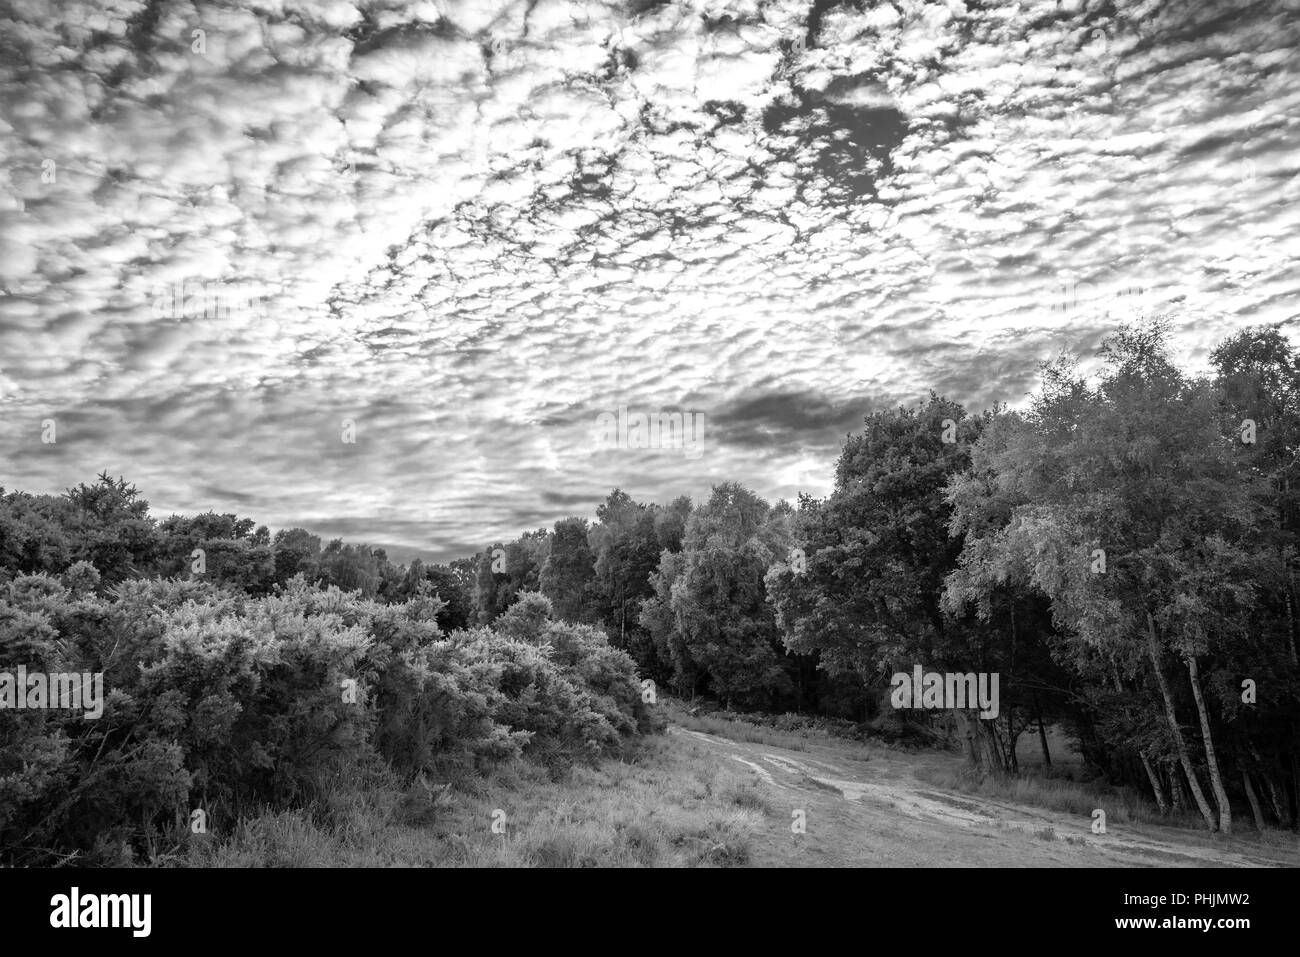 Stunning mackerel sky cirrocumulus altocumulus cloud formations in Summer sky landscape black and white image Stock Photo